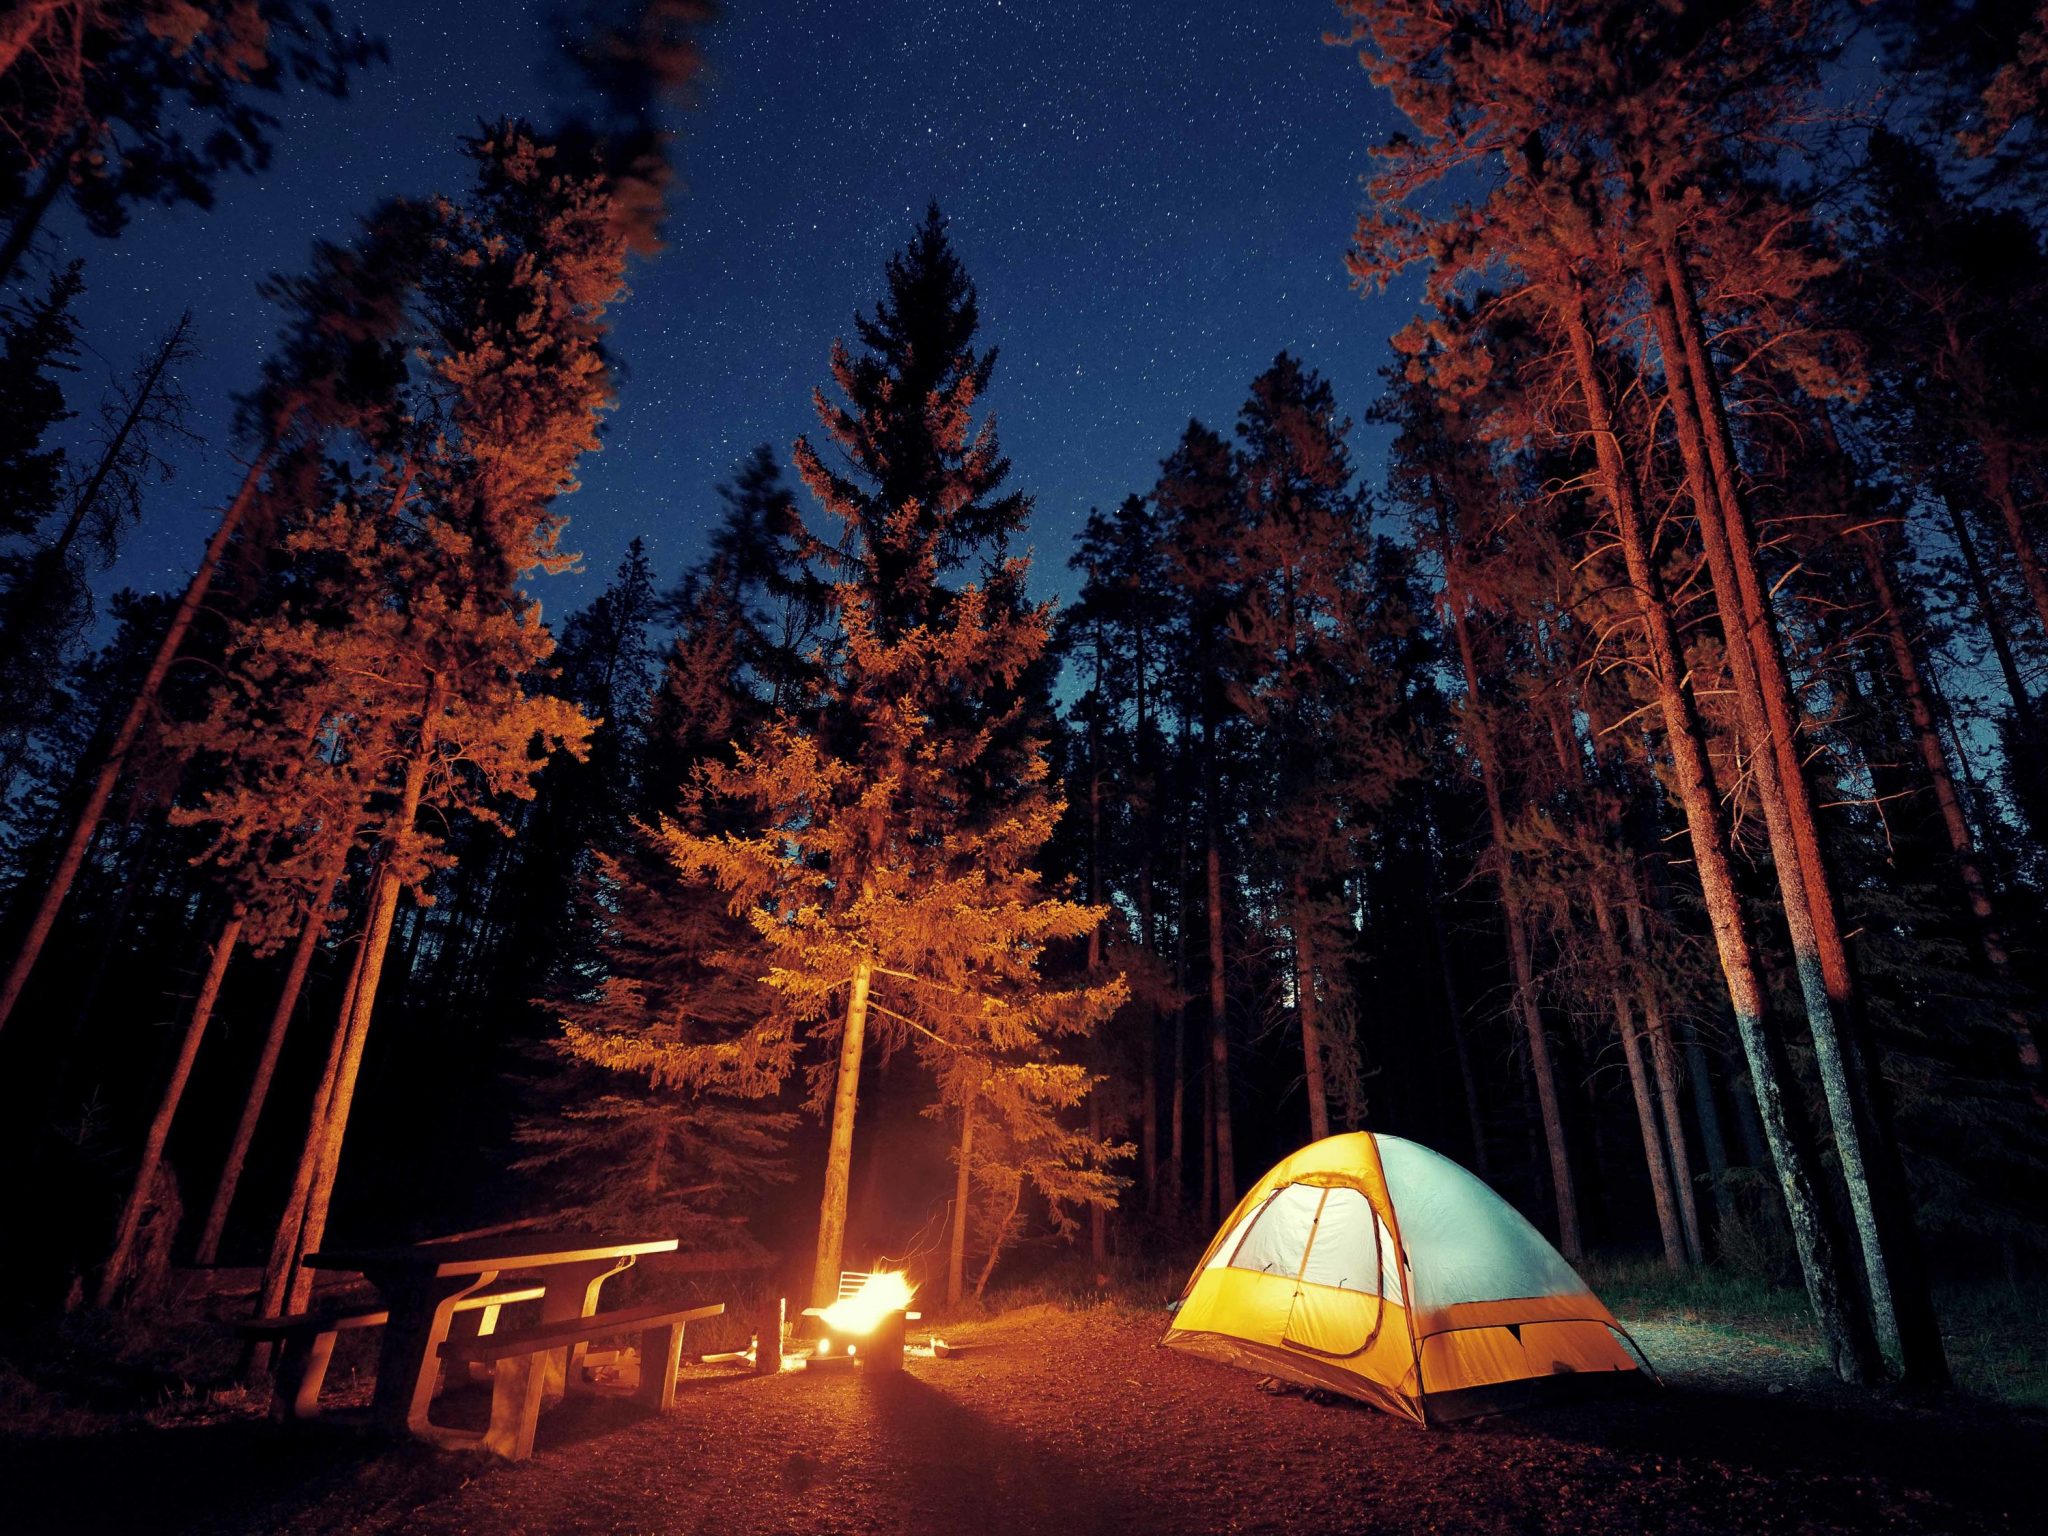 a camping trip meaning